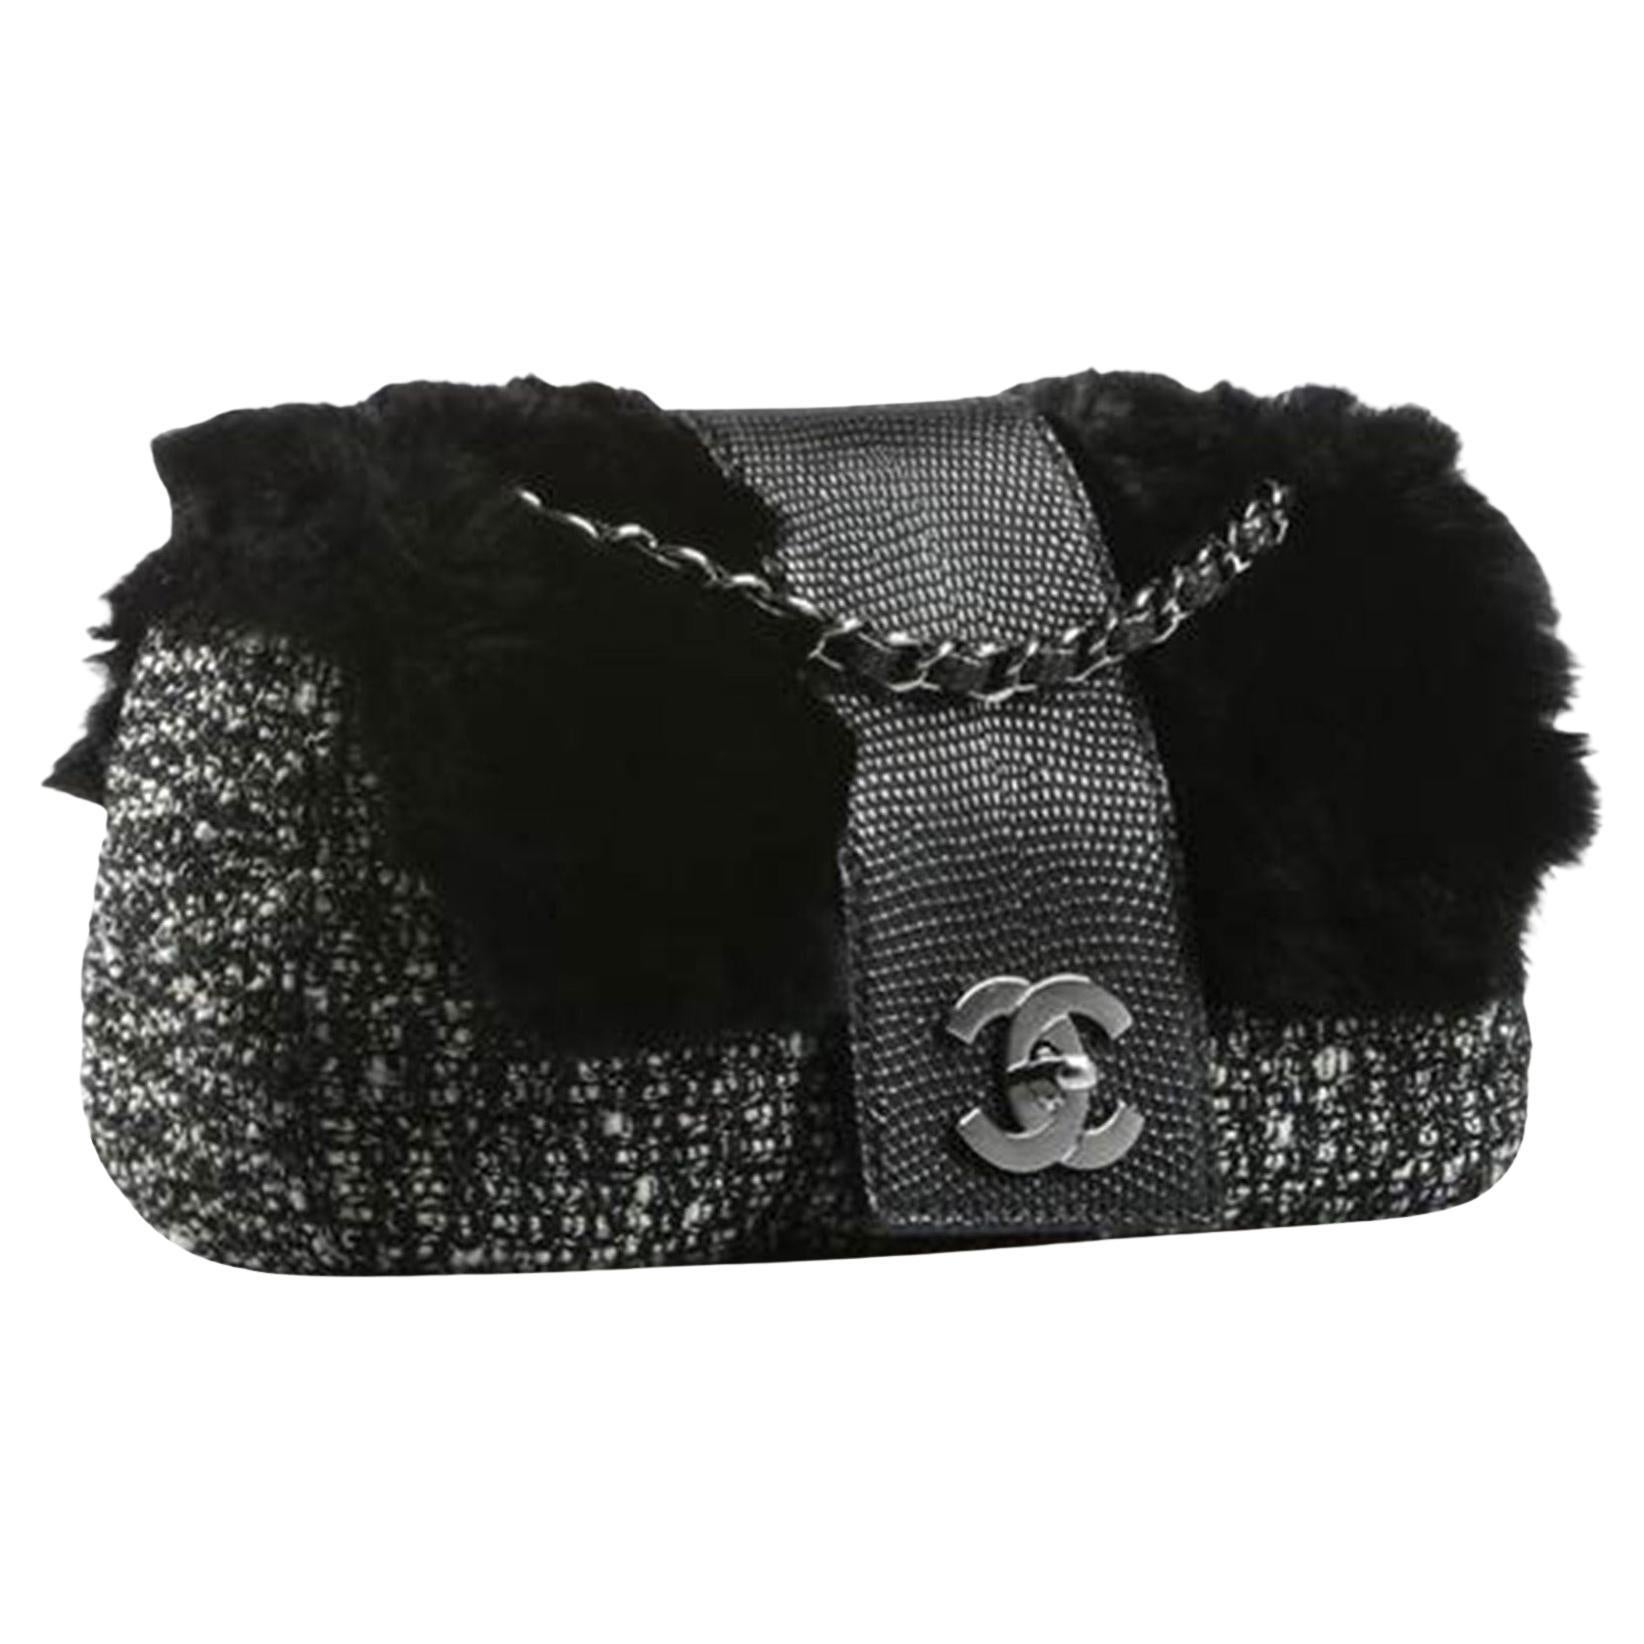 Chanel Classic Flap Limited Edition 2005 Black & White Grey Tweed Fur Lizard Bag For Sale